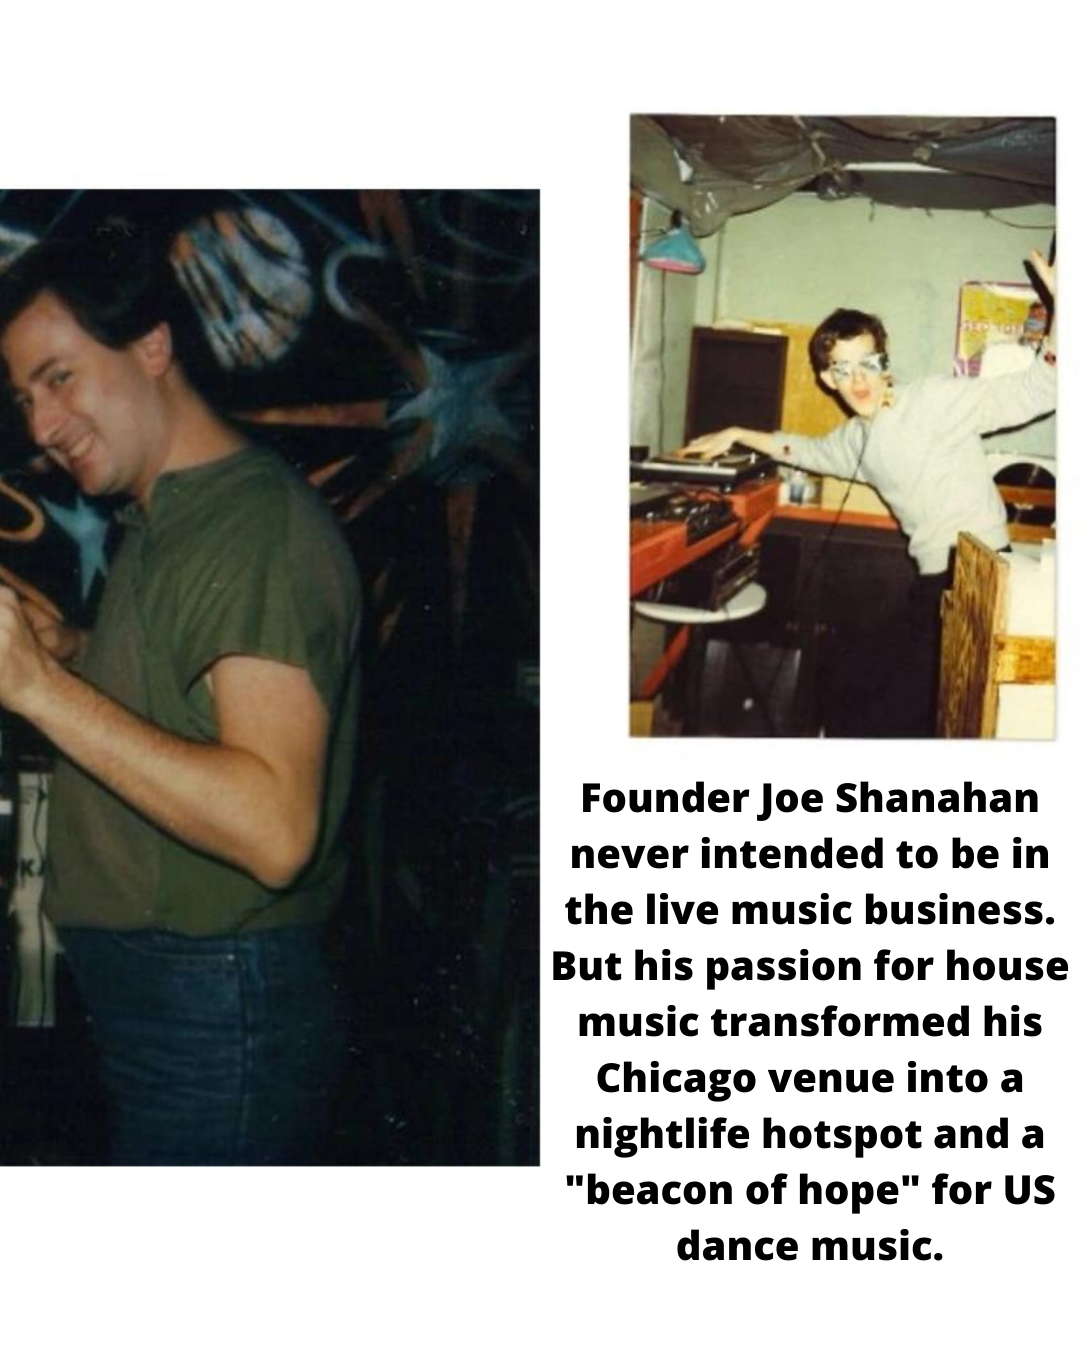 Founder Joe Shanahan
never intended to be in
the live music business.

But his passion for house
music transformed his
Chicago venue into a

nightlife hotspot and a
"beacon of hope" for US

dance music.